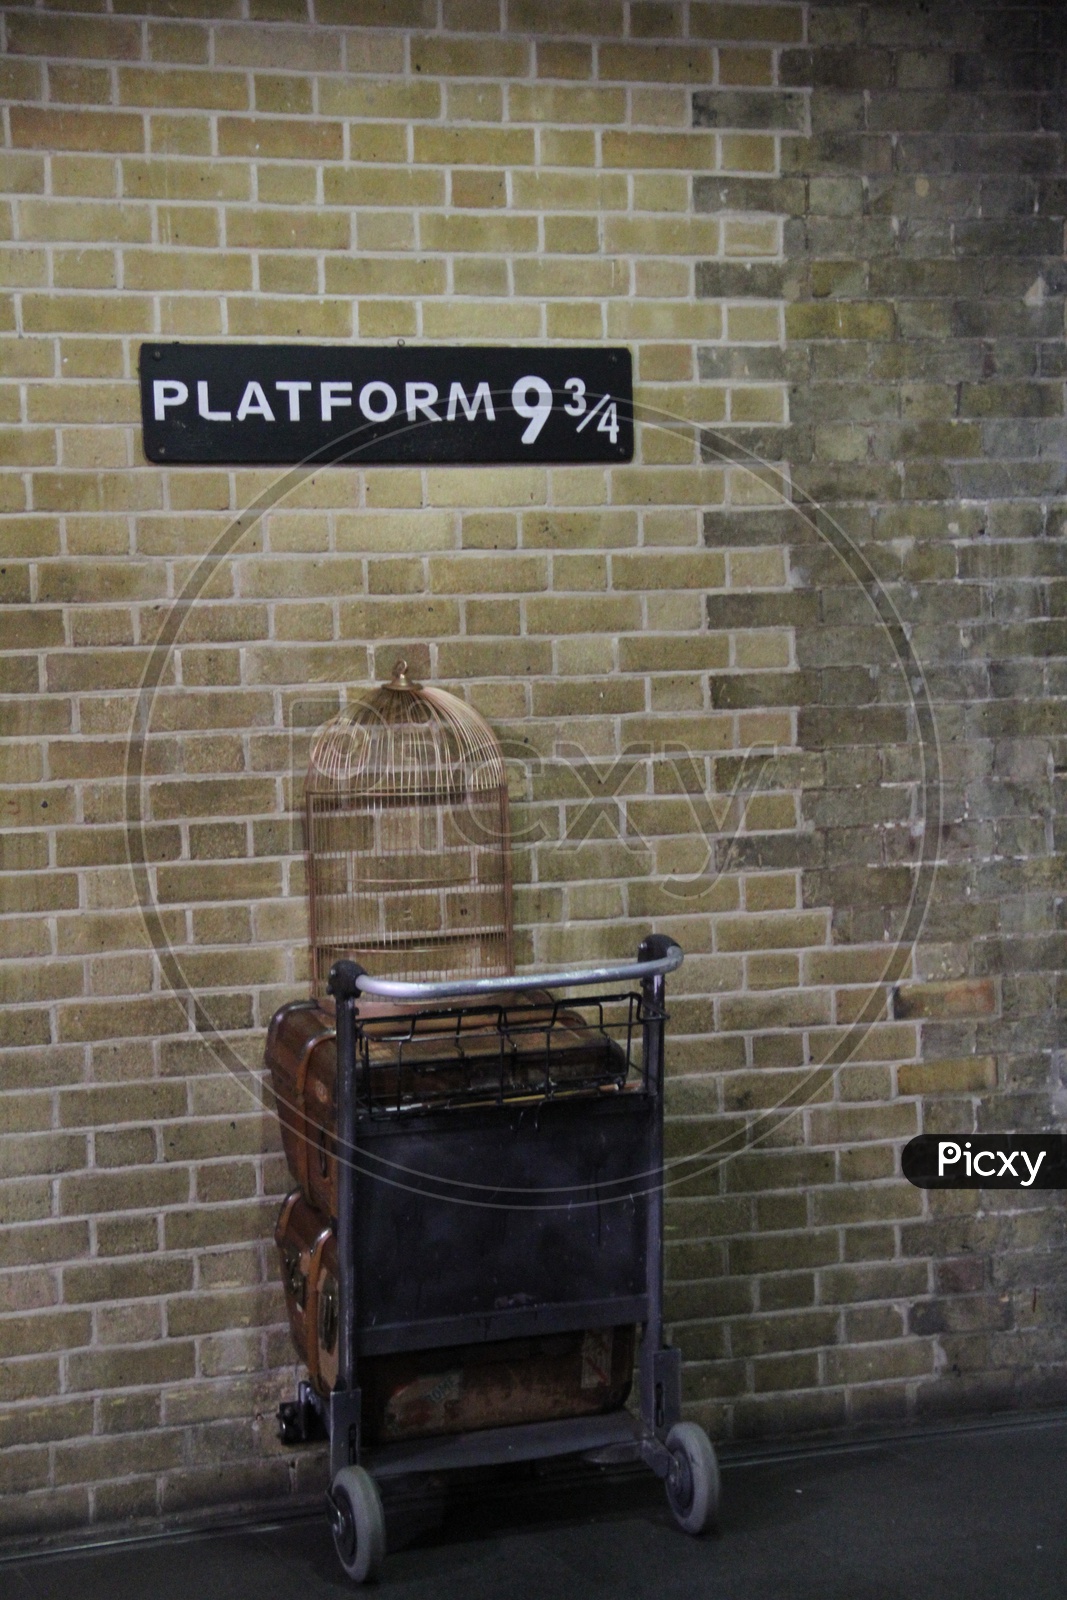 Platform 9 3/4 Sign from Harry Potter Movie in King's Cross Station